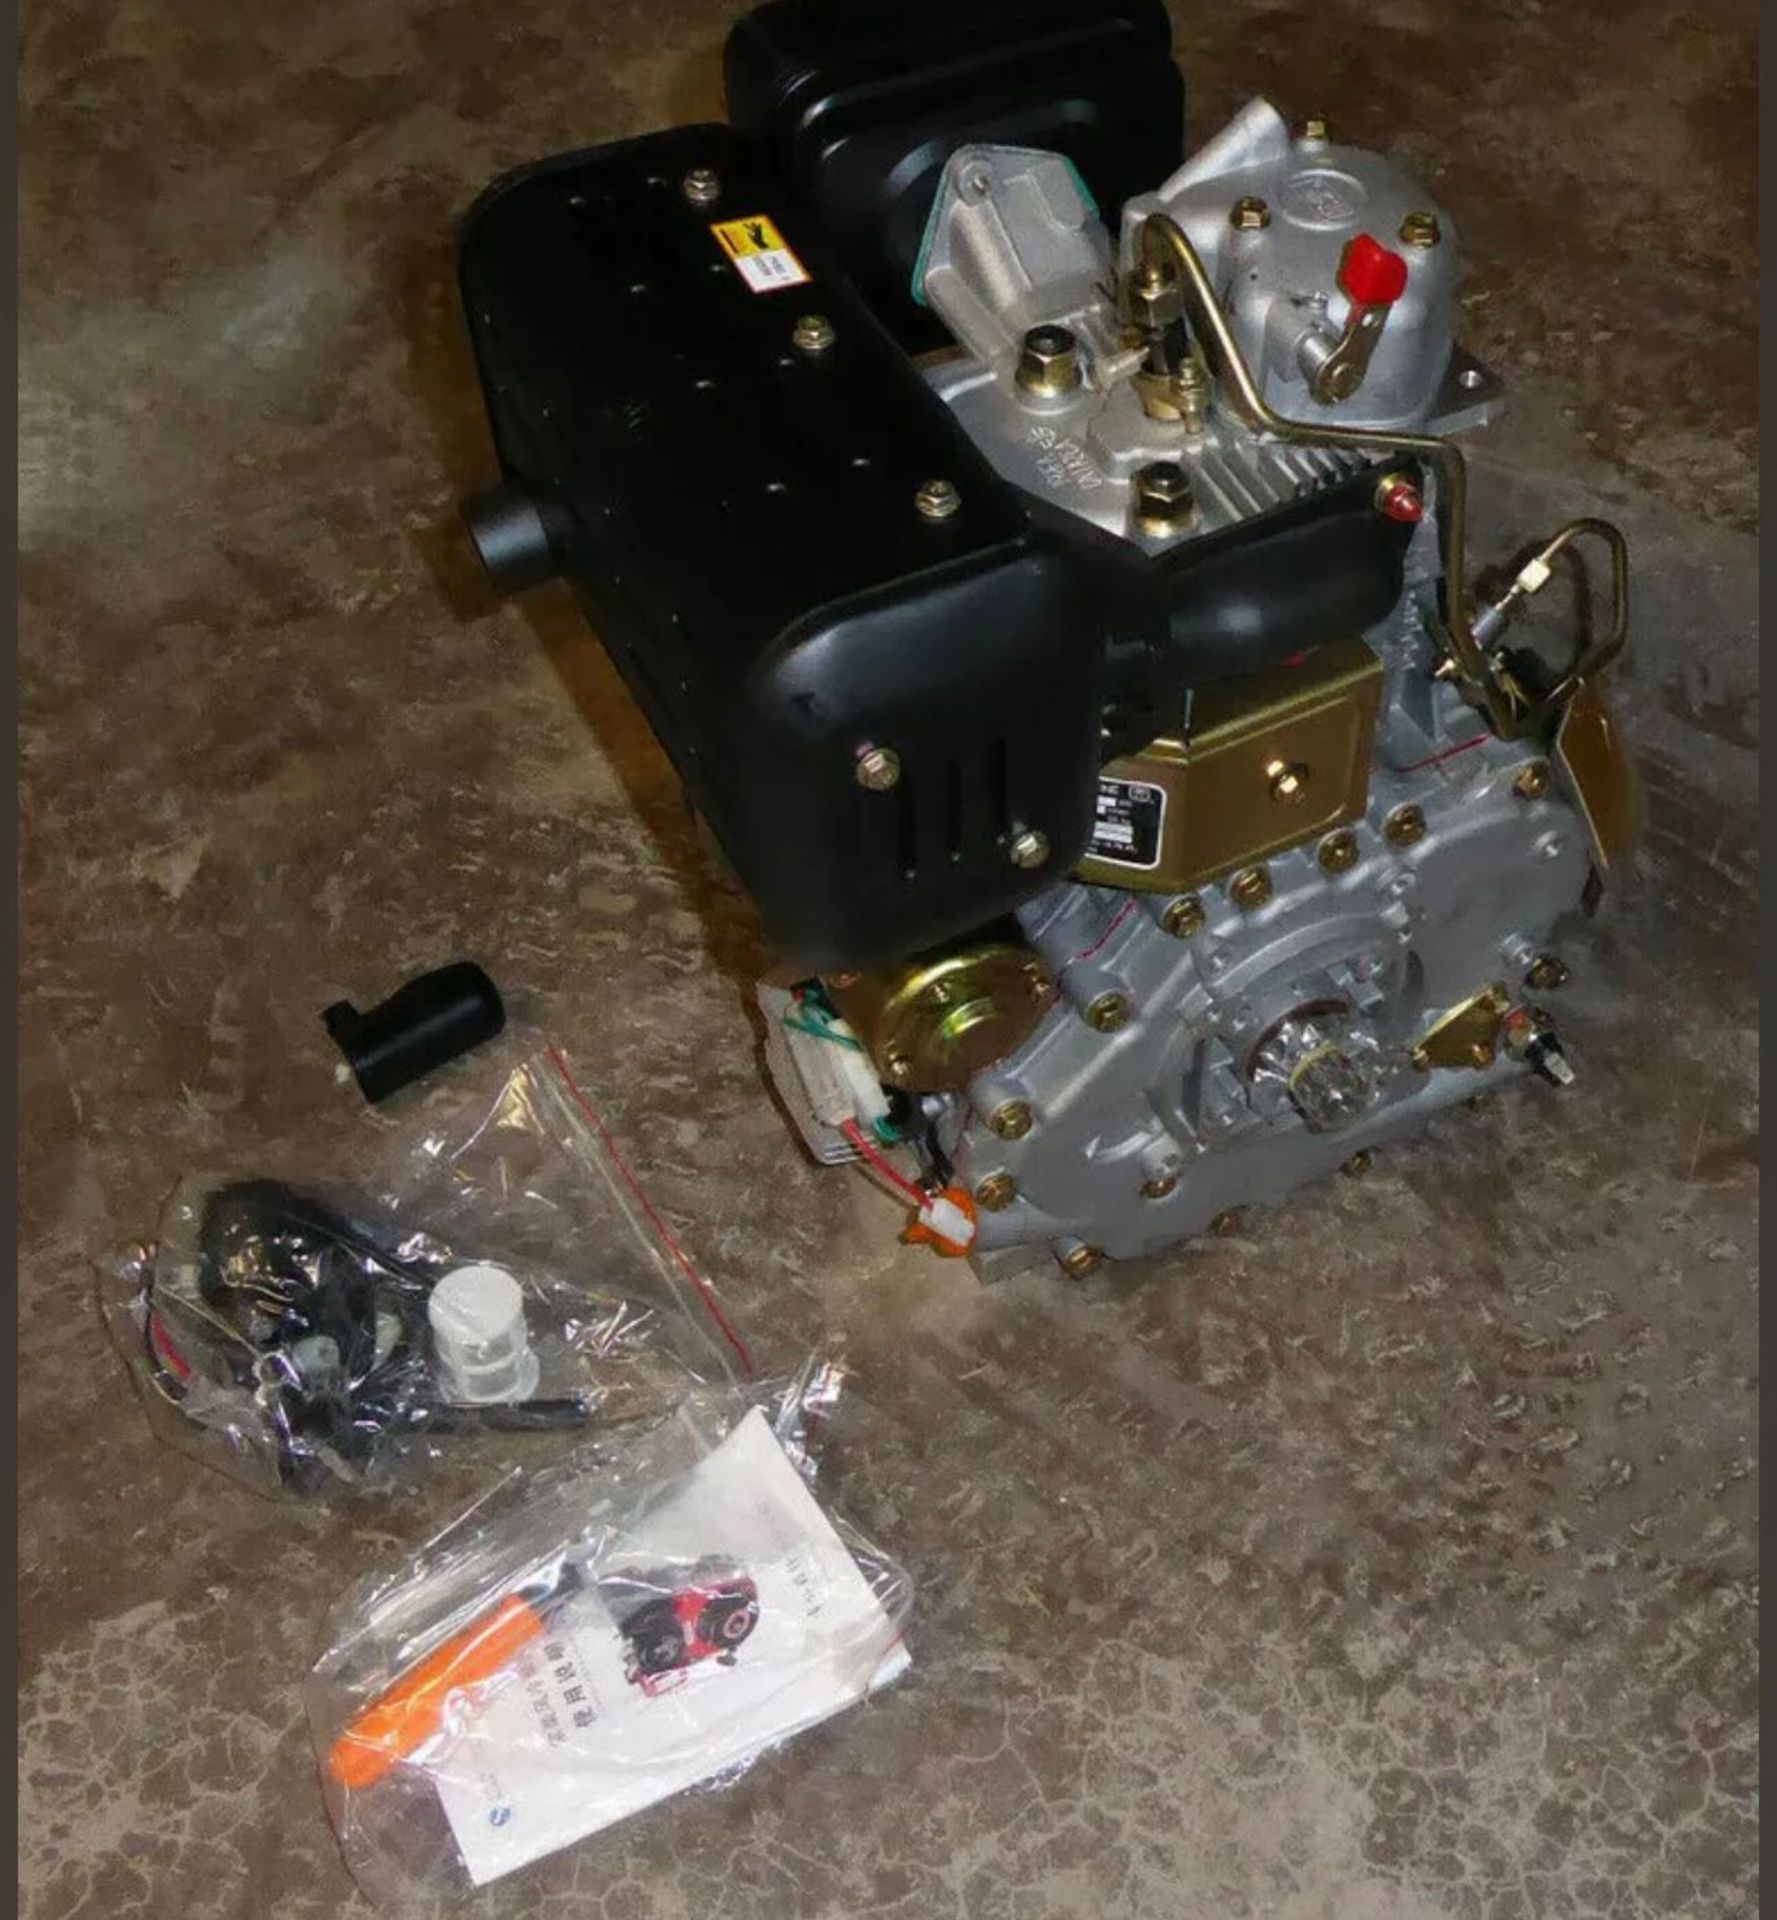 NEW AND UNUSED CHANGHAI 192FA DIESEL ENGINE, SUITABLE FOR MINI DIGGER, STILL IN BOX *PLUS VAT* - Image 5 of 6